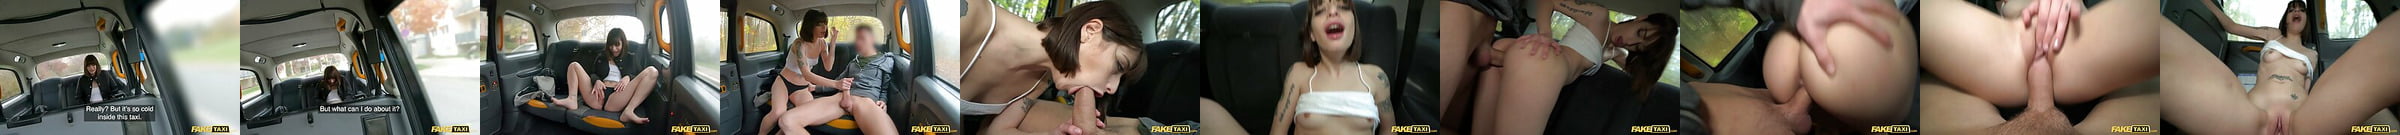 Fake Taxi Alyssa Bounty Fucked In The Arse By A Taxi Driver Xhamster 9028